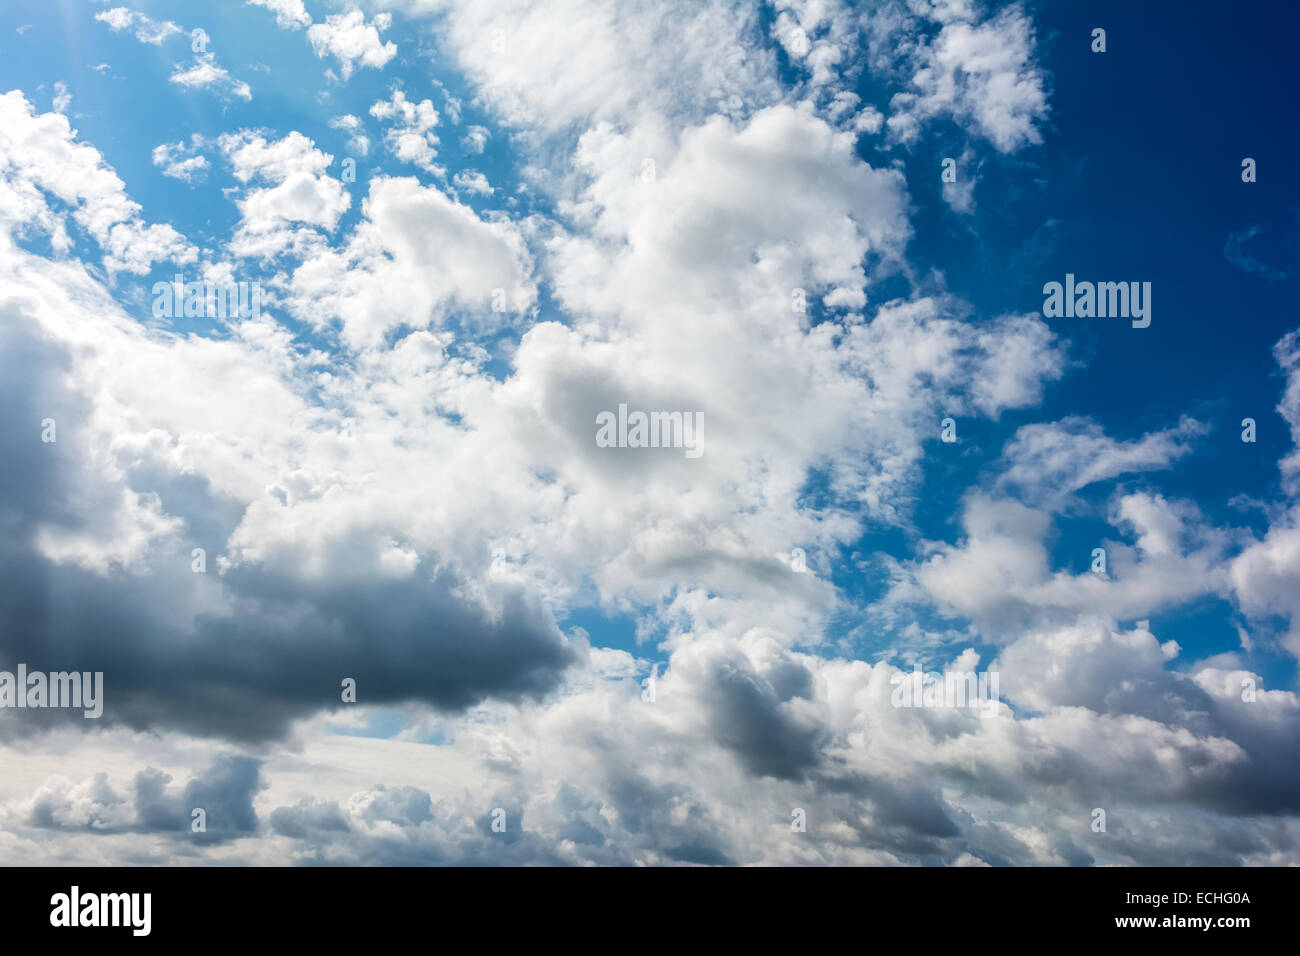 Blue Summer Sky With Sun And Clouds Stock Photo